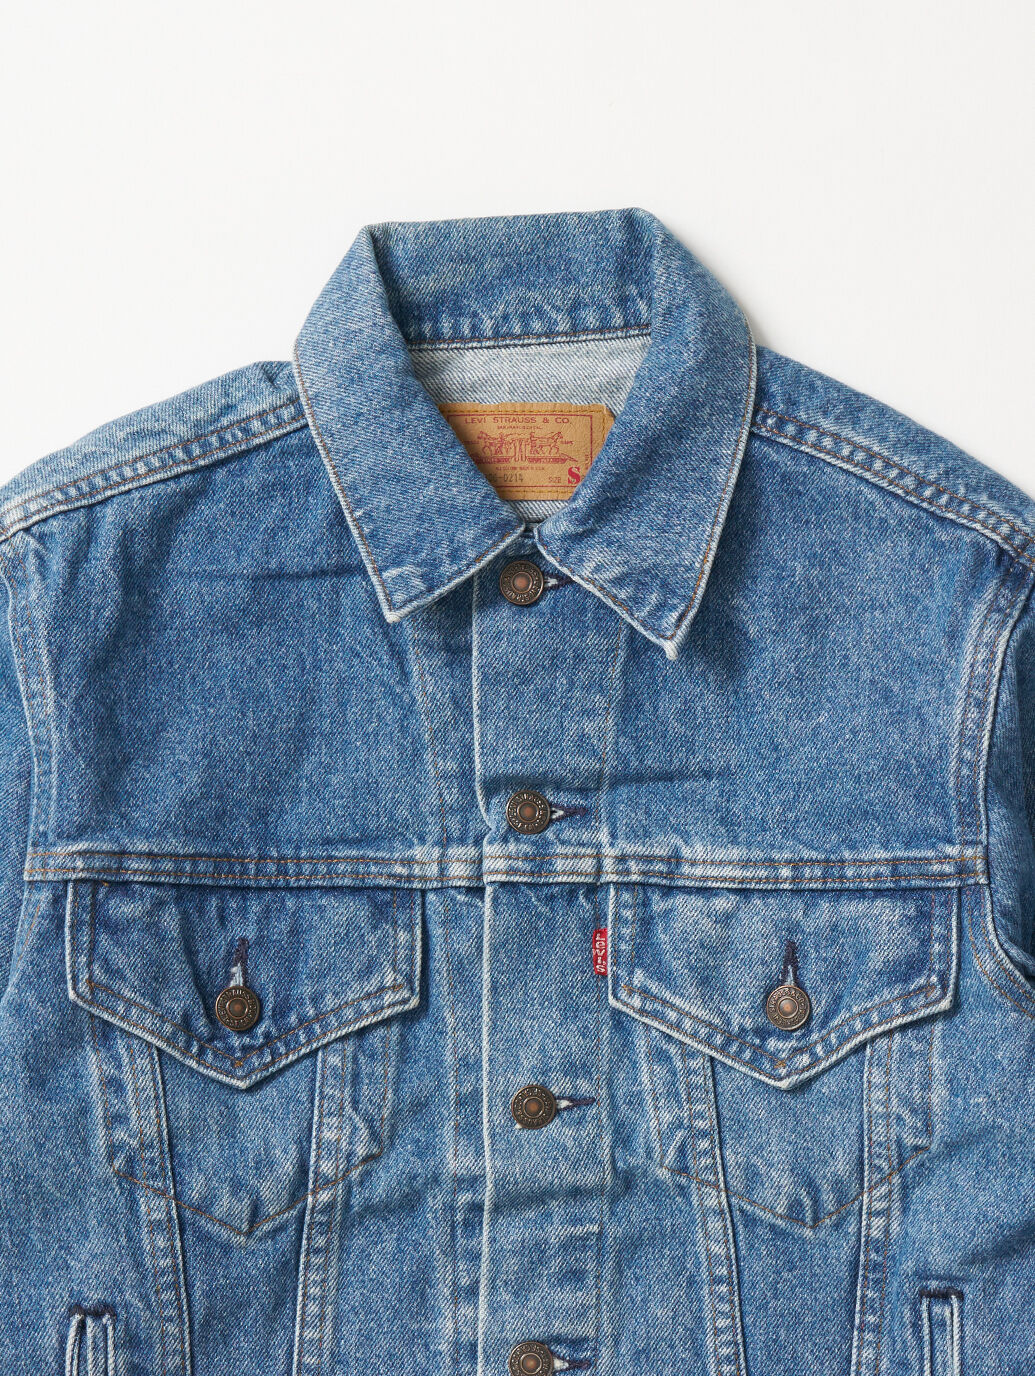 LEVI'S® AUTHORIZED VINTAGE MADE IN THE USA TYPEⅢ トラッカー 